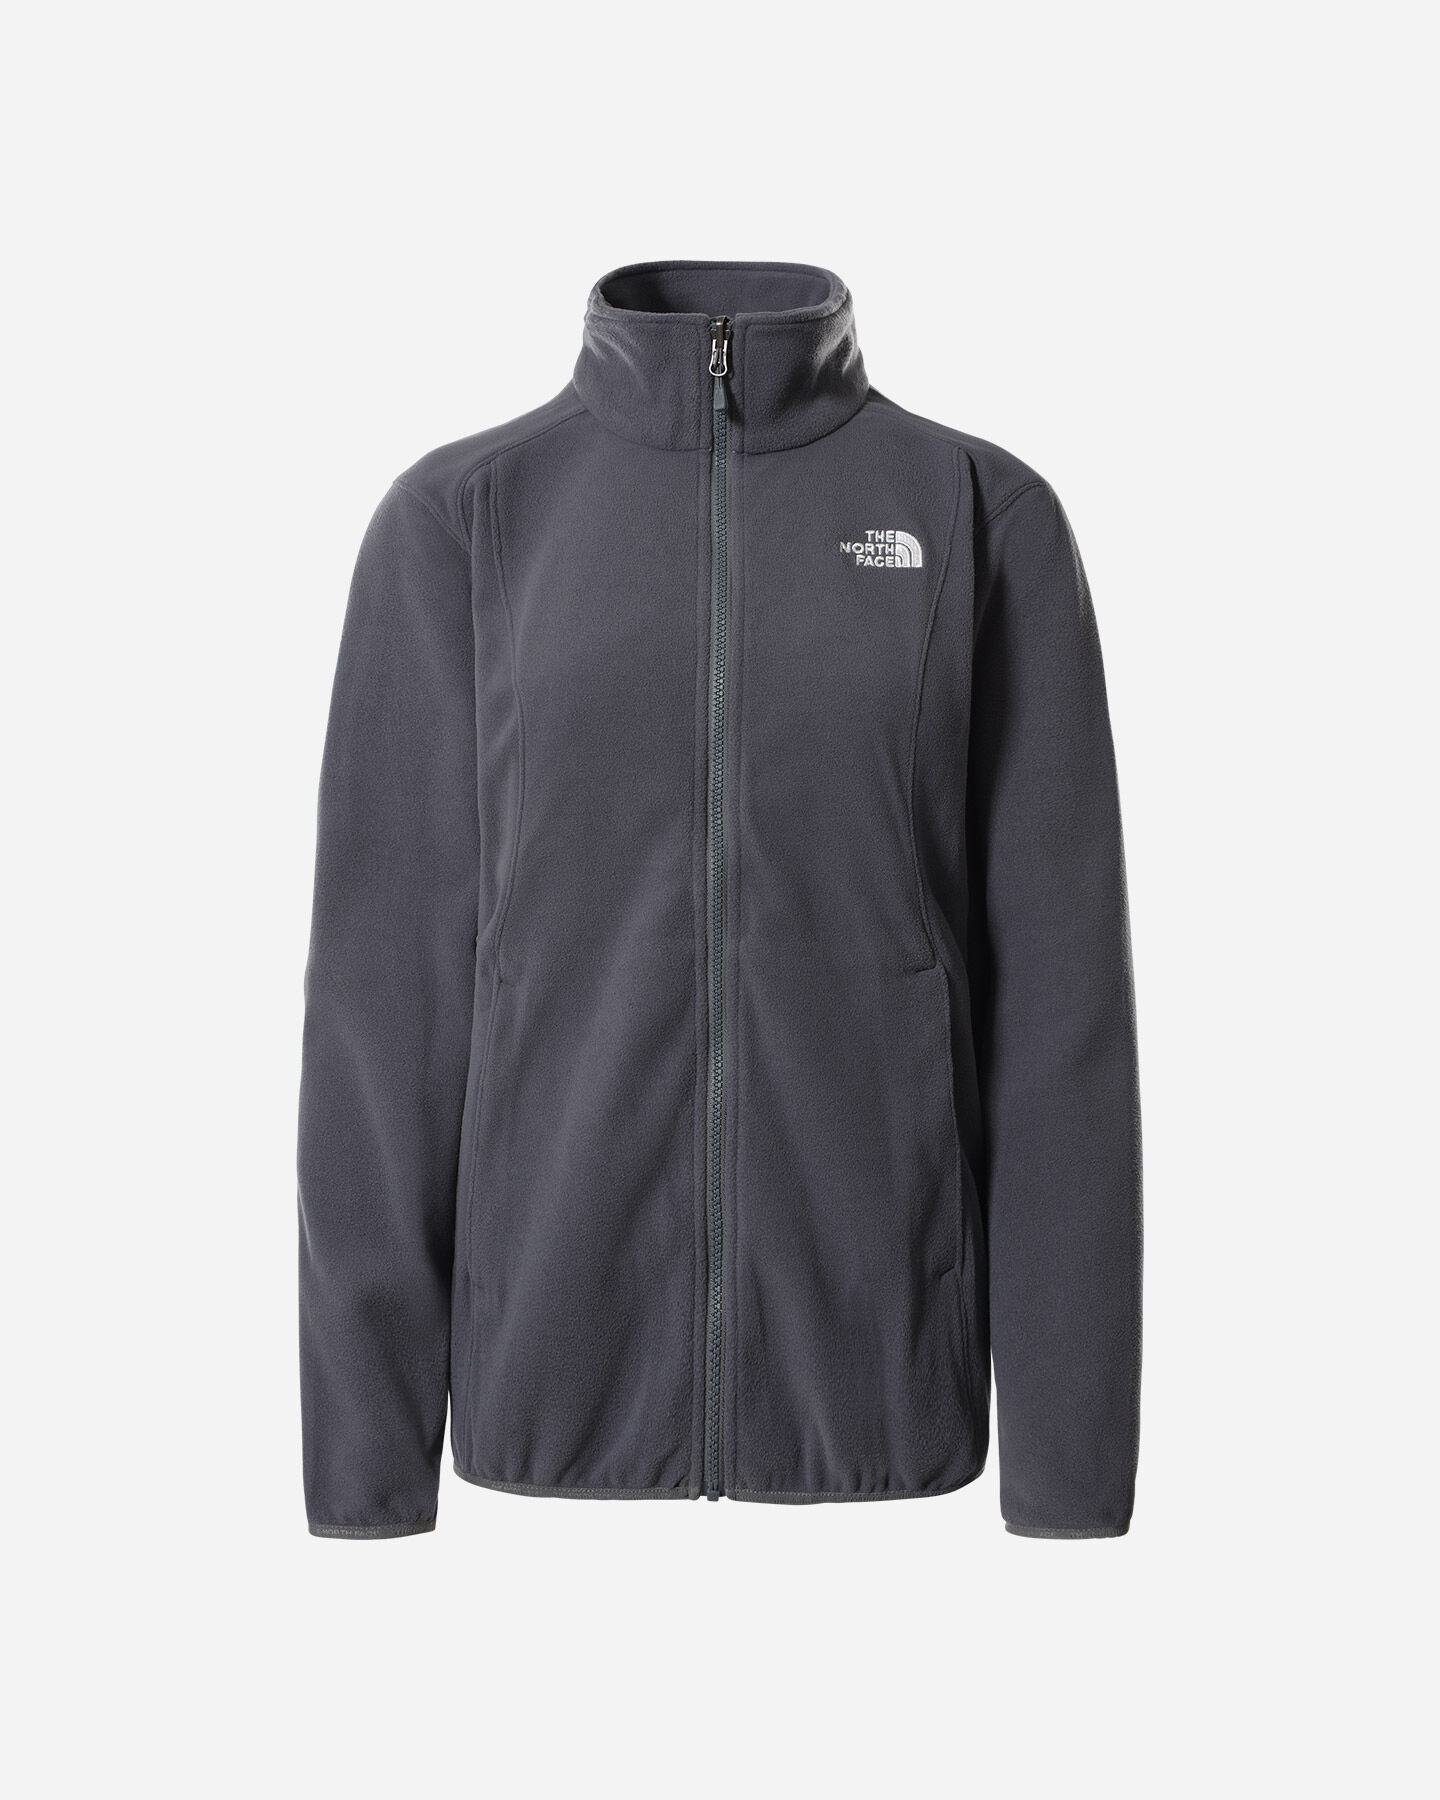  Giacca outdoor THE NORTH FACE EVOLVE II TRICLIMATE 2L W S5347007|252|XS scatto 1